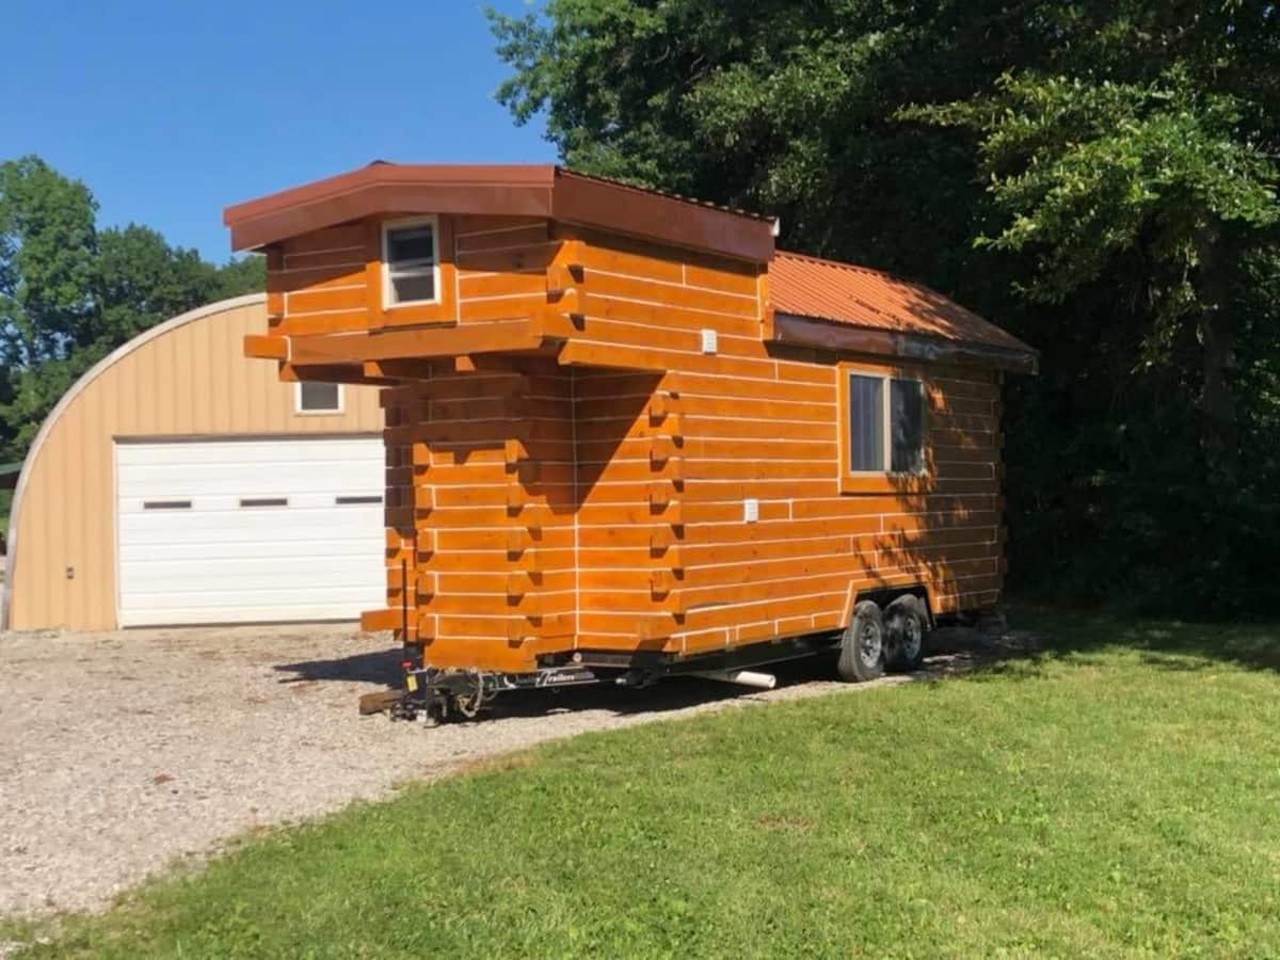 Tiny Houses For Sale In Ohio - Tiny Houses For Sale, Rent and